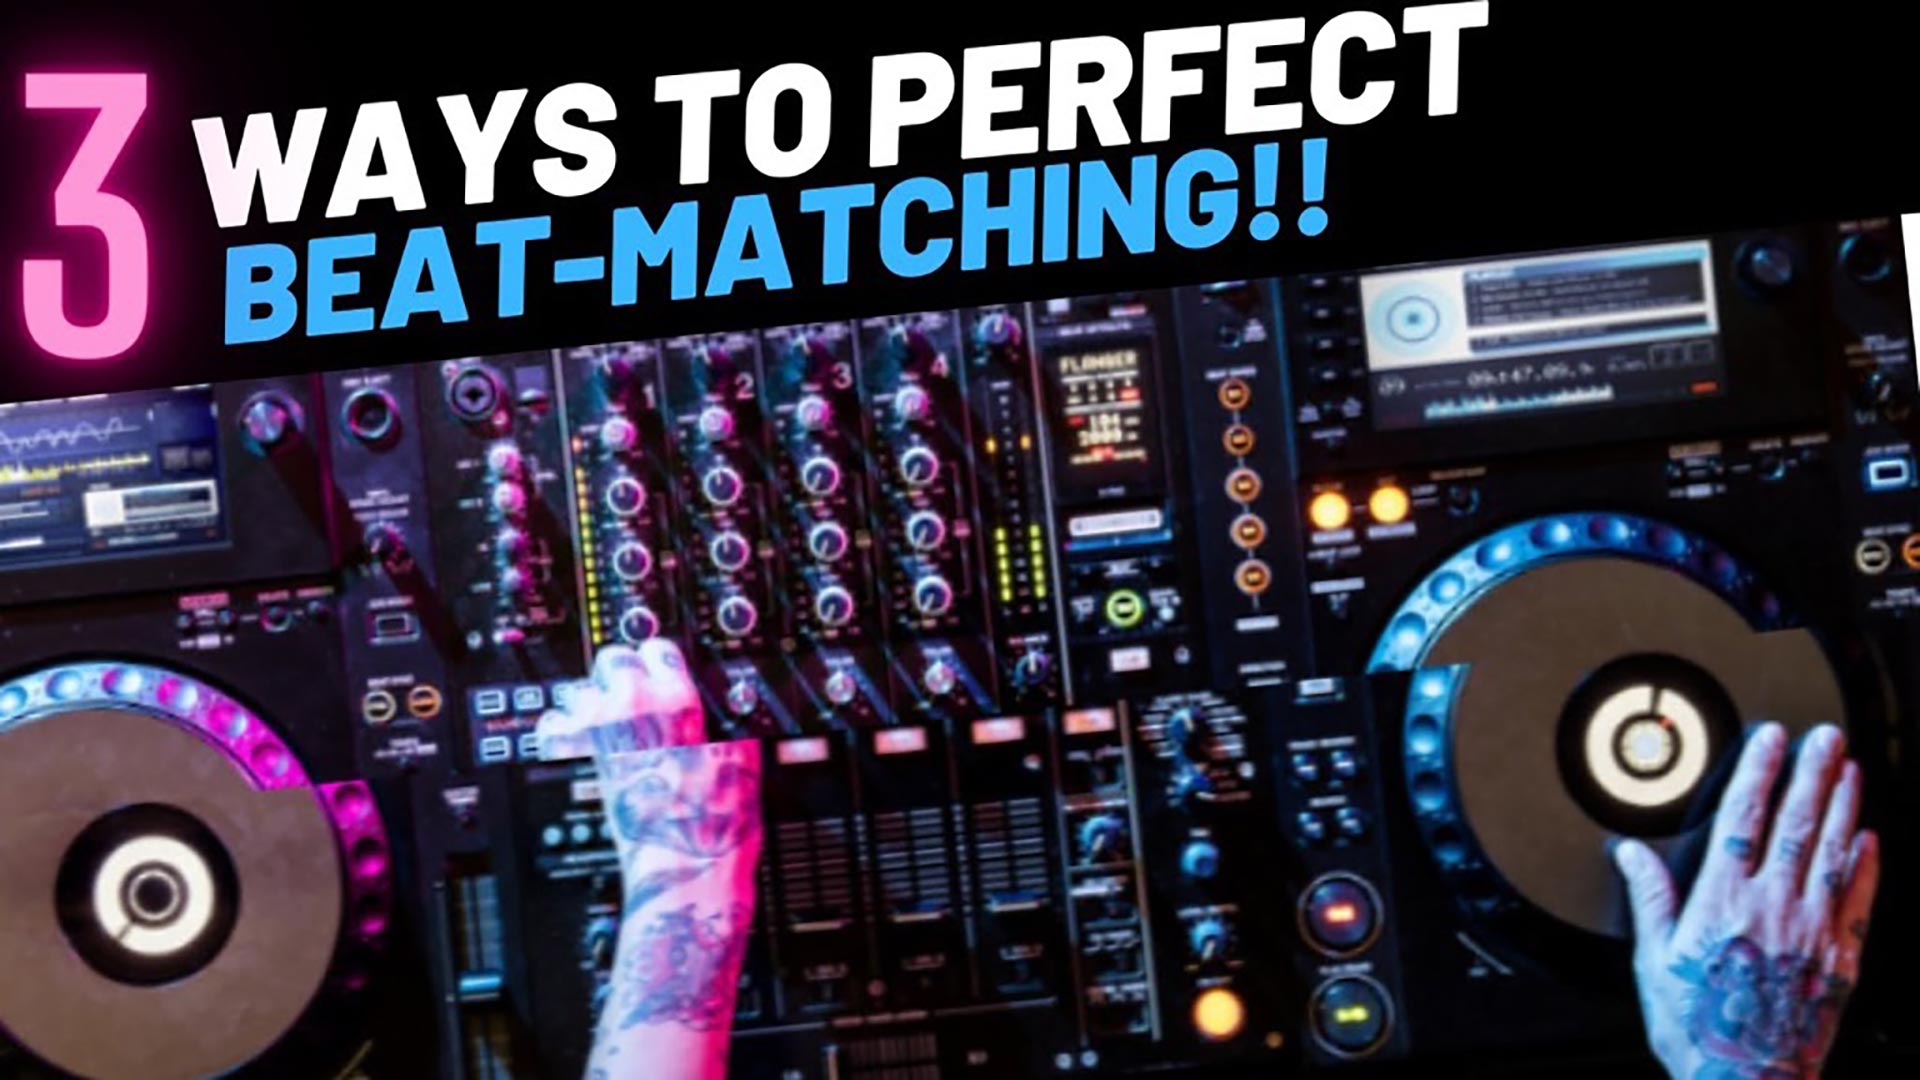 How to Beatmatch - 3 ways to perfect beatmatchingh